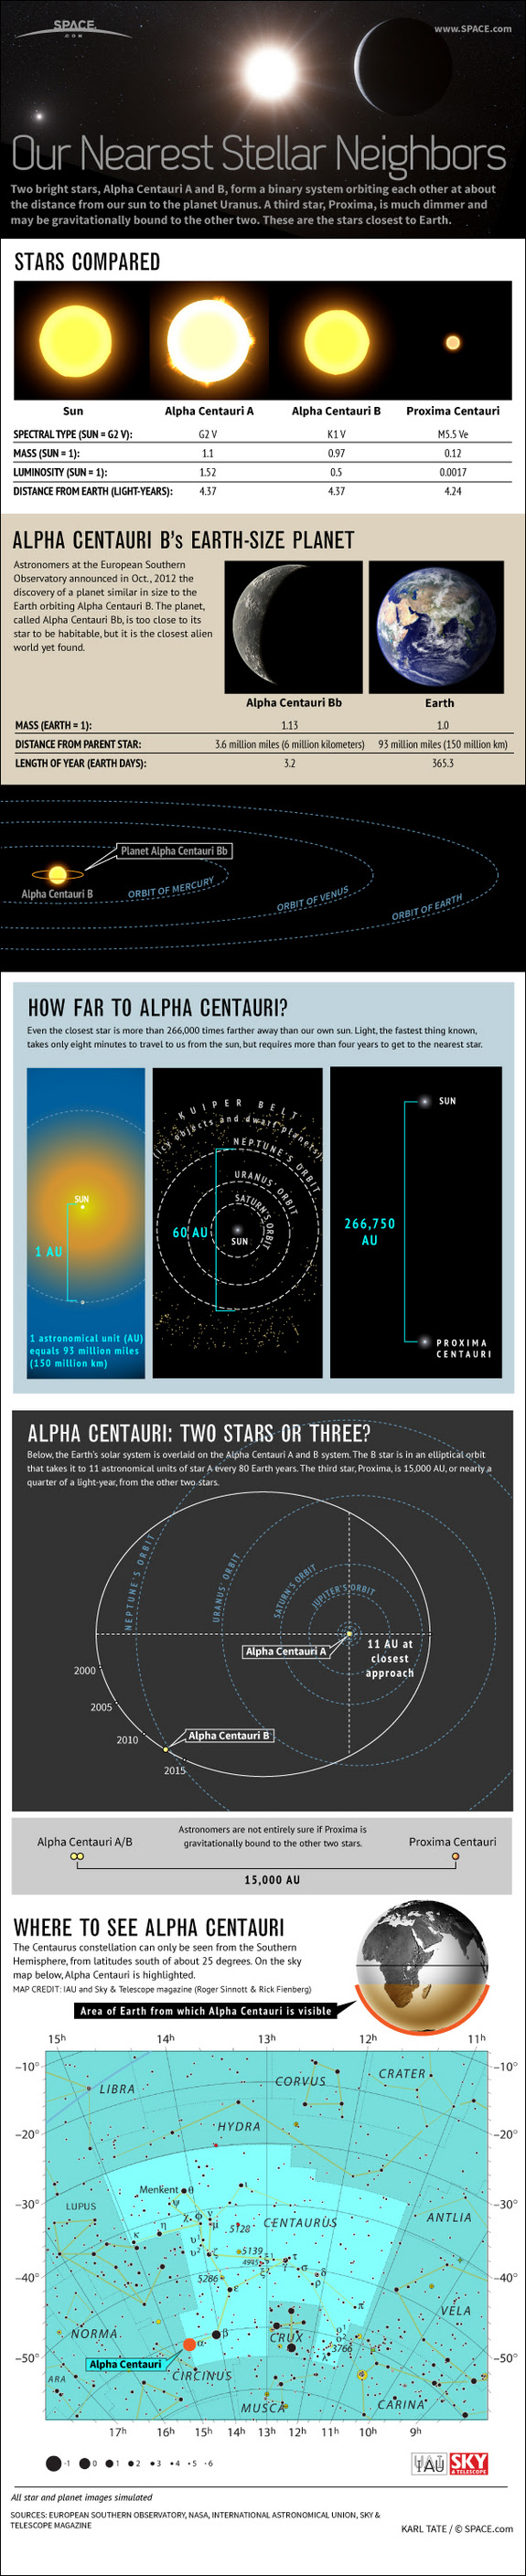 Find out about the nearby Alpha Centauri star system and its newly-discovered Earth-size planet, in this SPACE.com infographic.